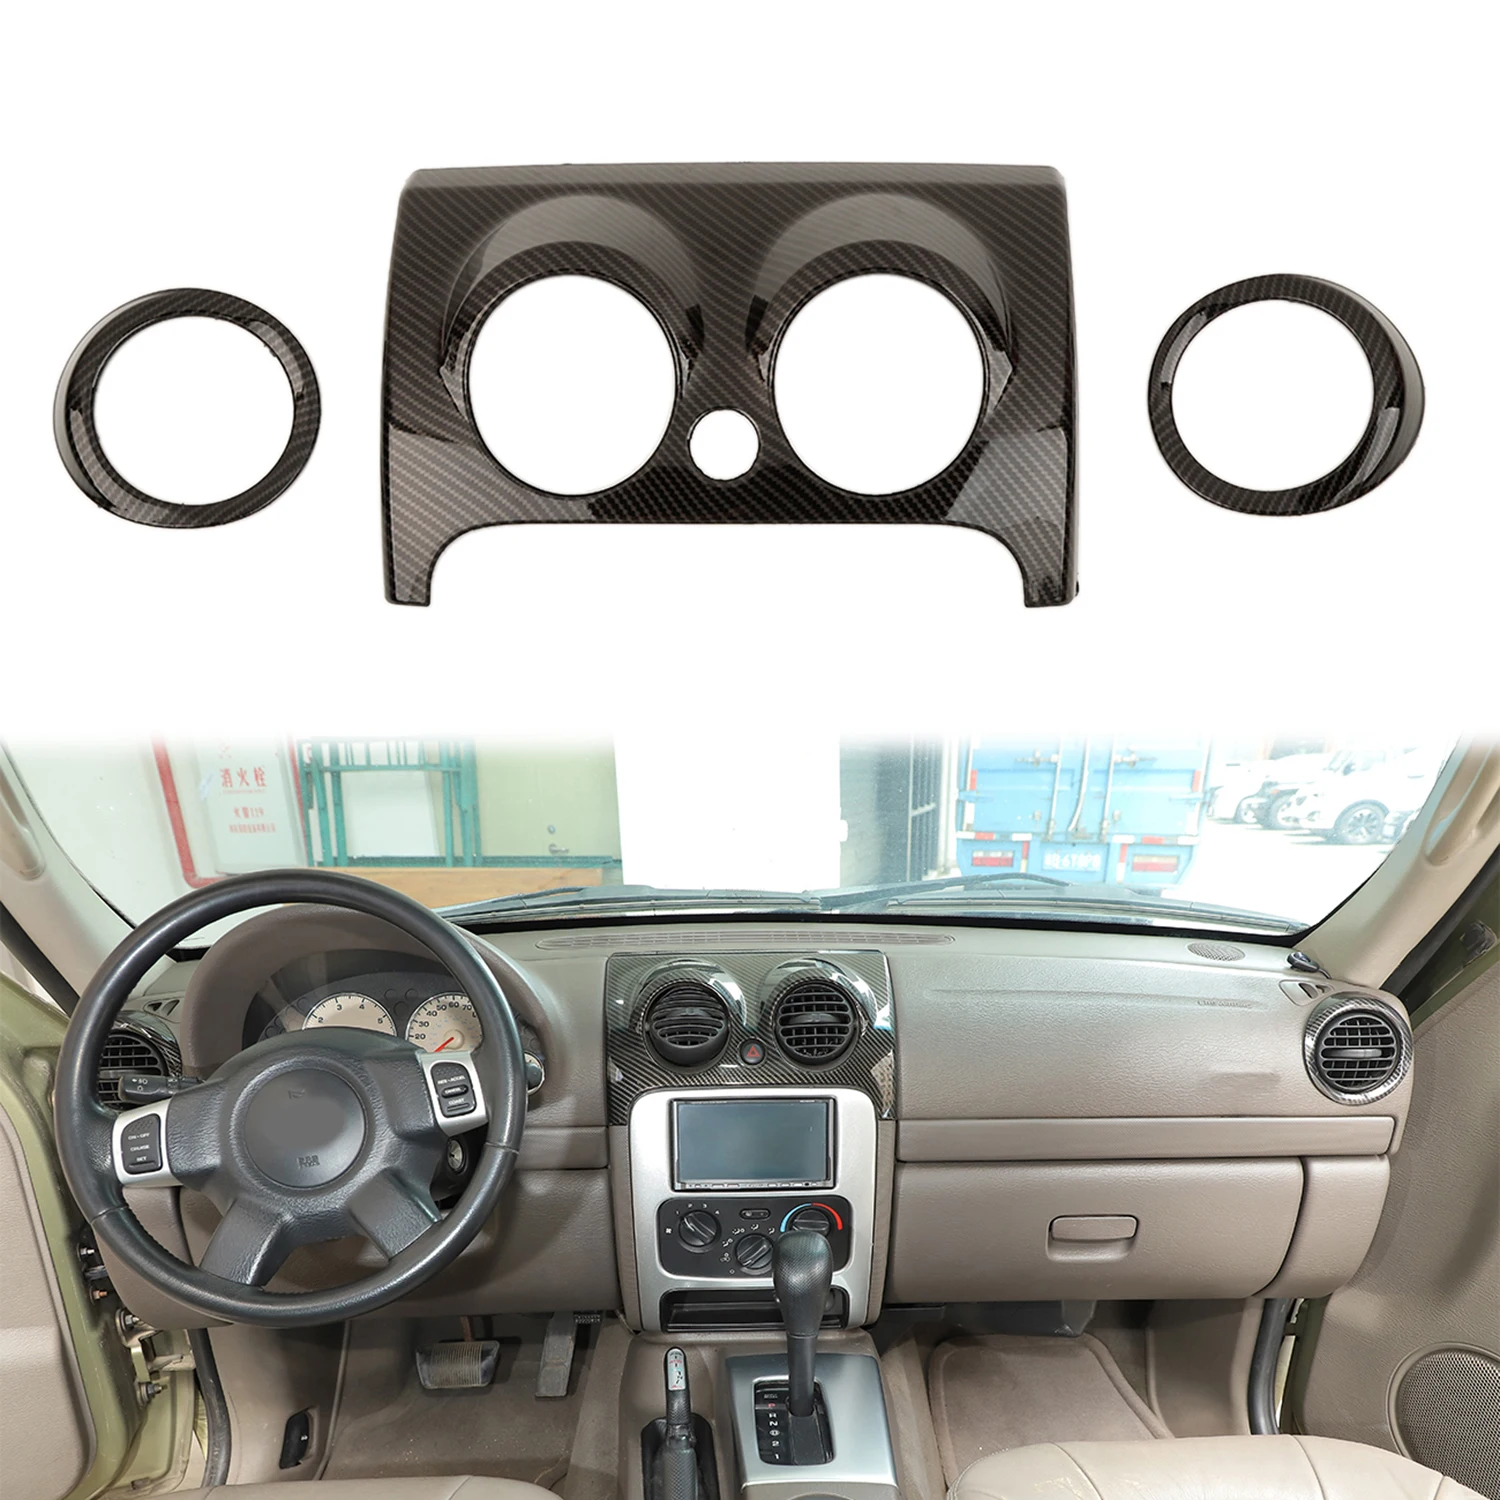 

Central Console AC Vent Outlet Panel Decoration Cover Trim for Jeep Liberty 1999-2006 ABS Stickers Car Interior Accessories